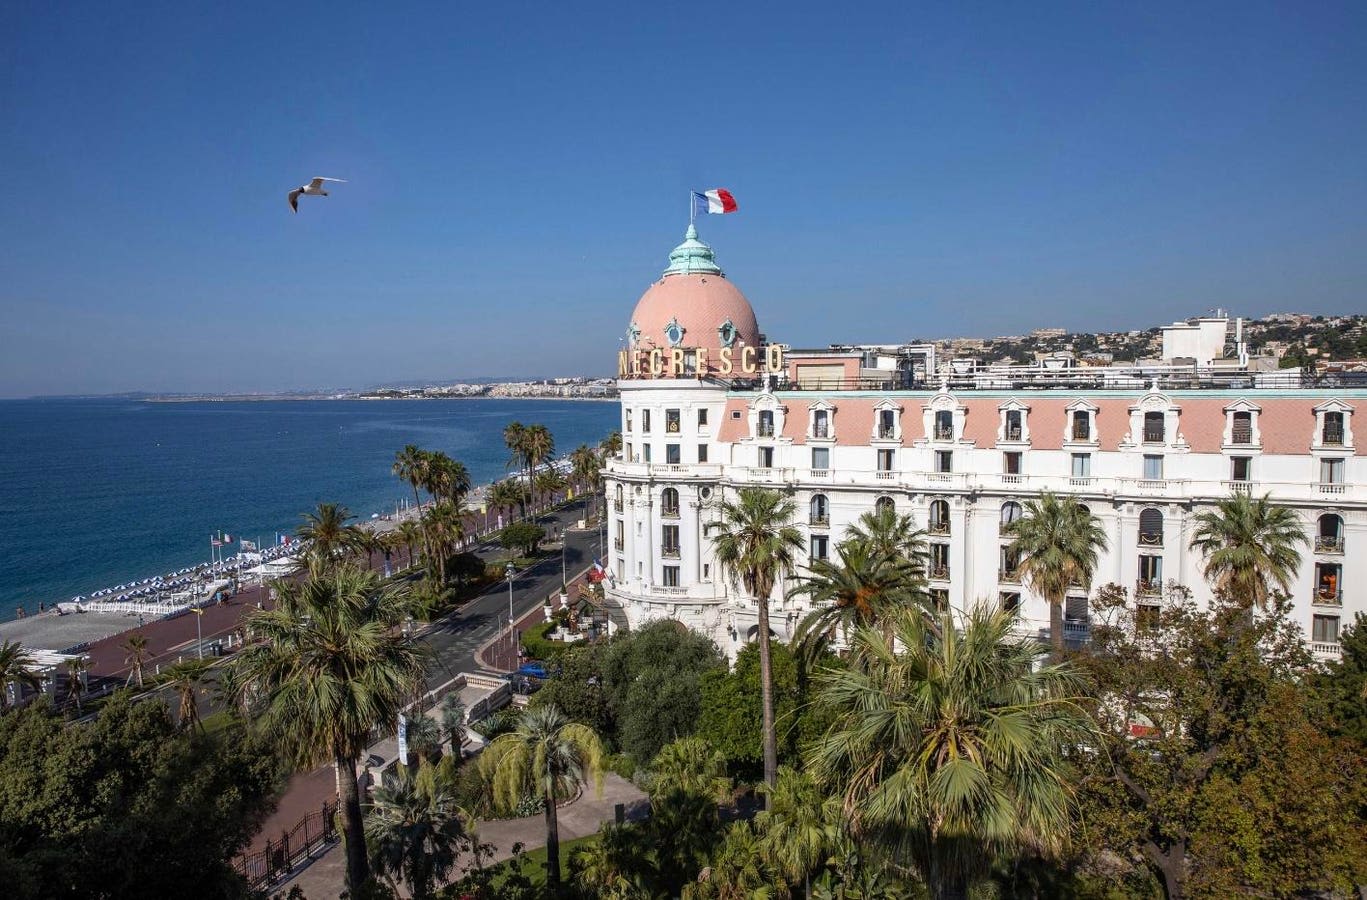 This Belle Epoque Art Hotel Boasts Some Of The French Riviera’s Grandest Guest Rooms